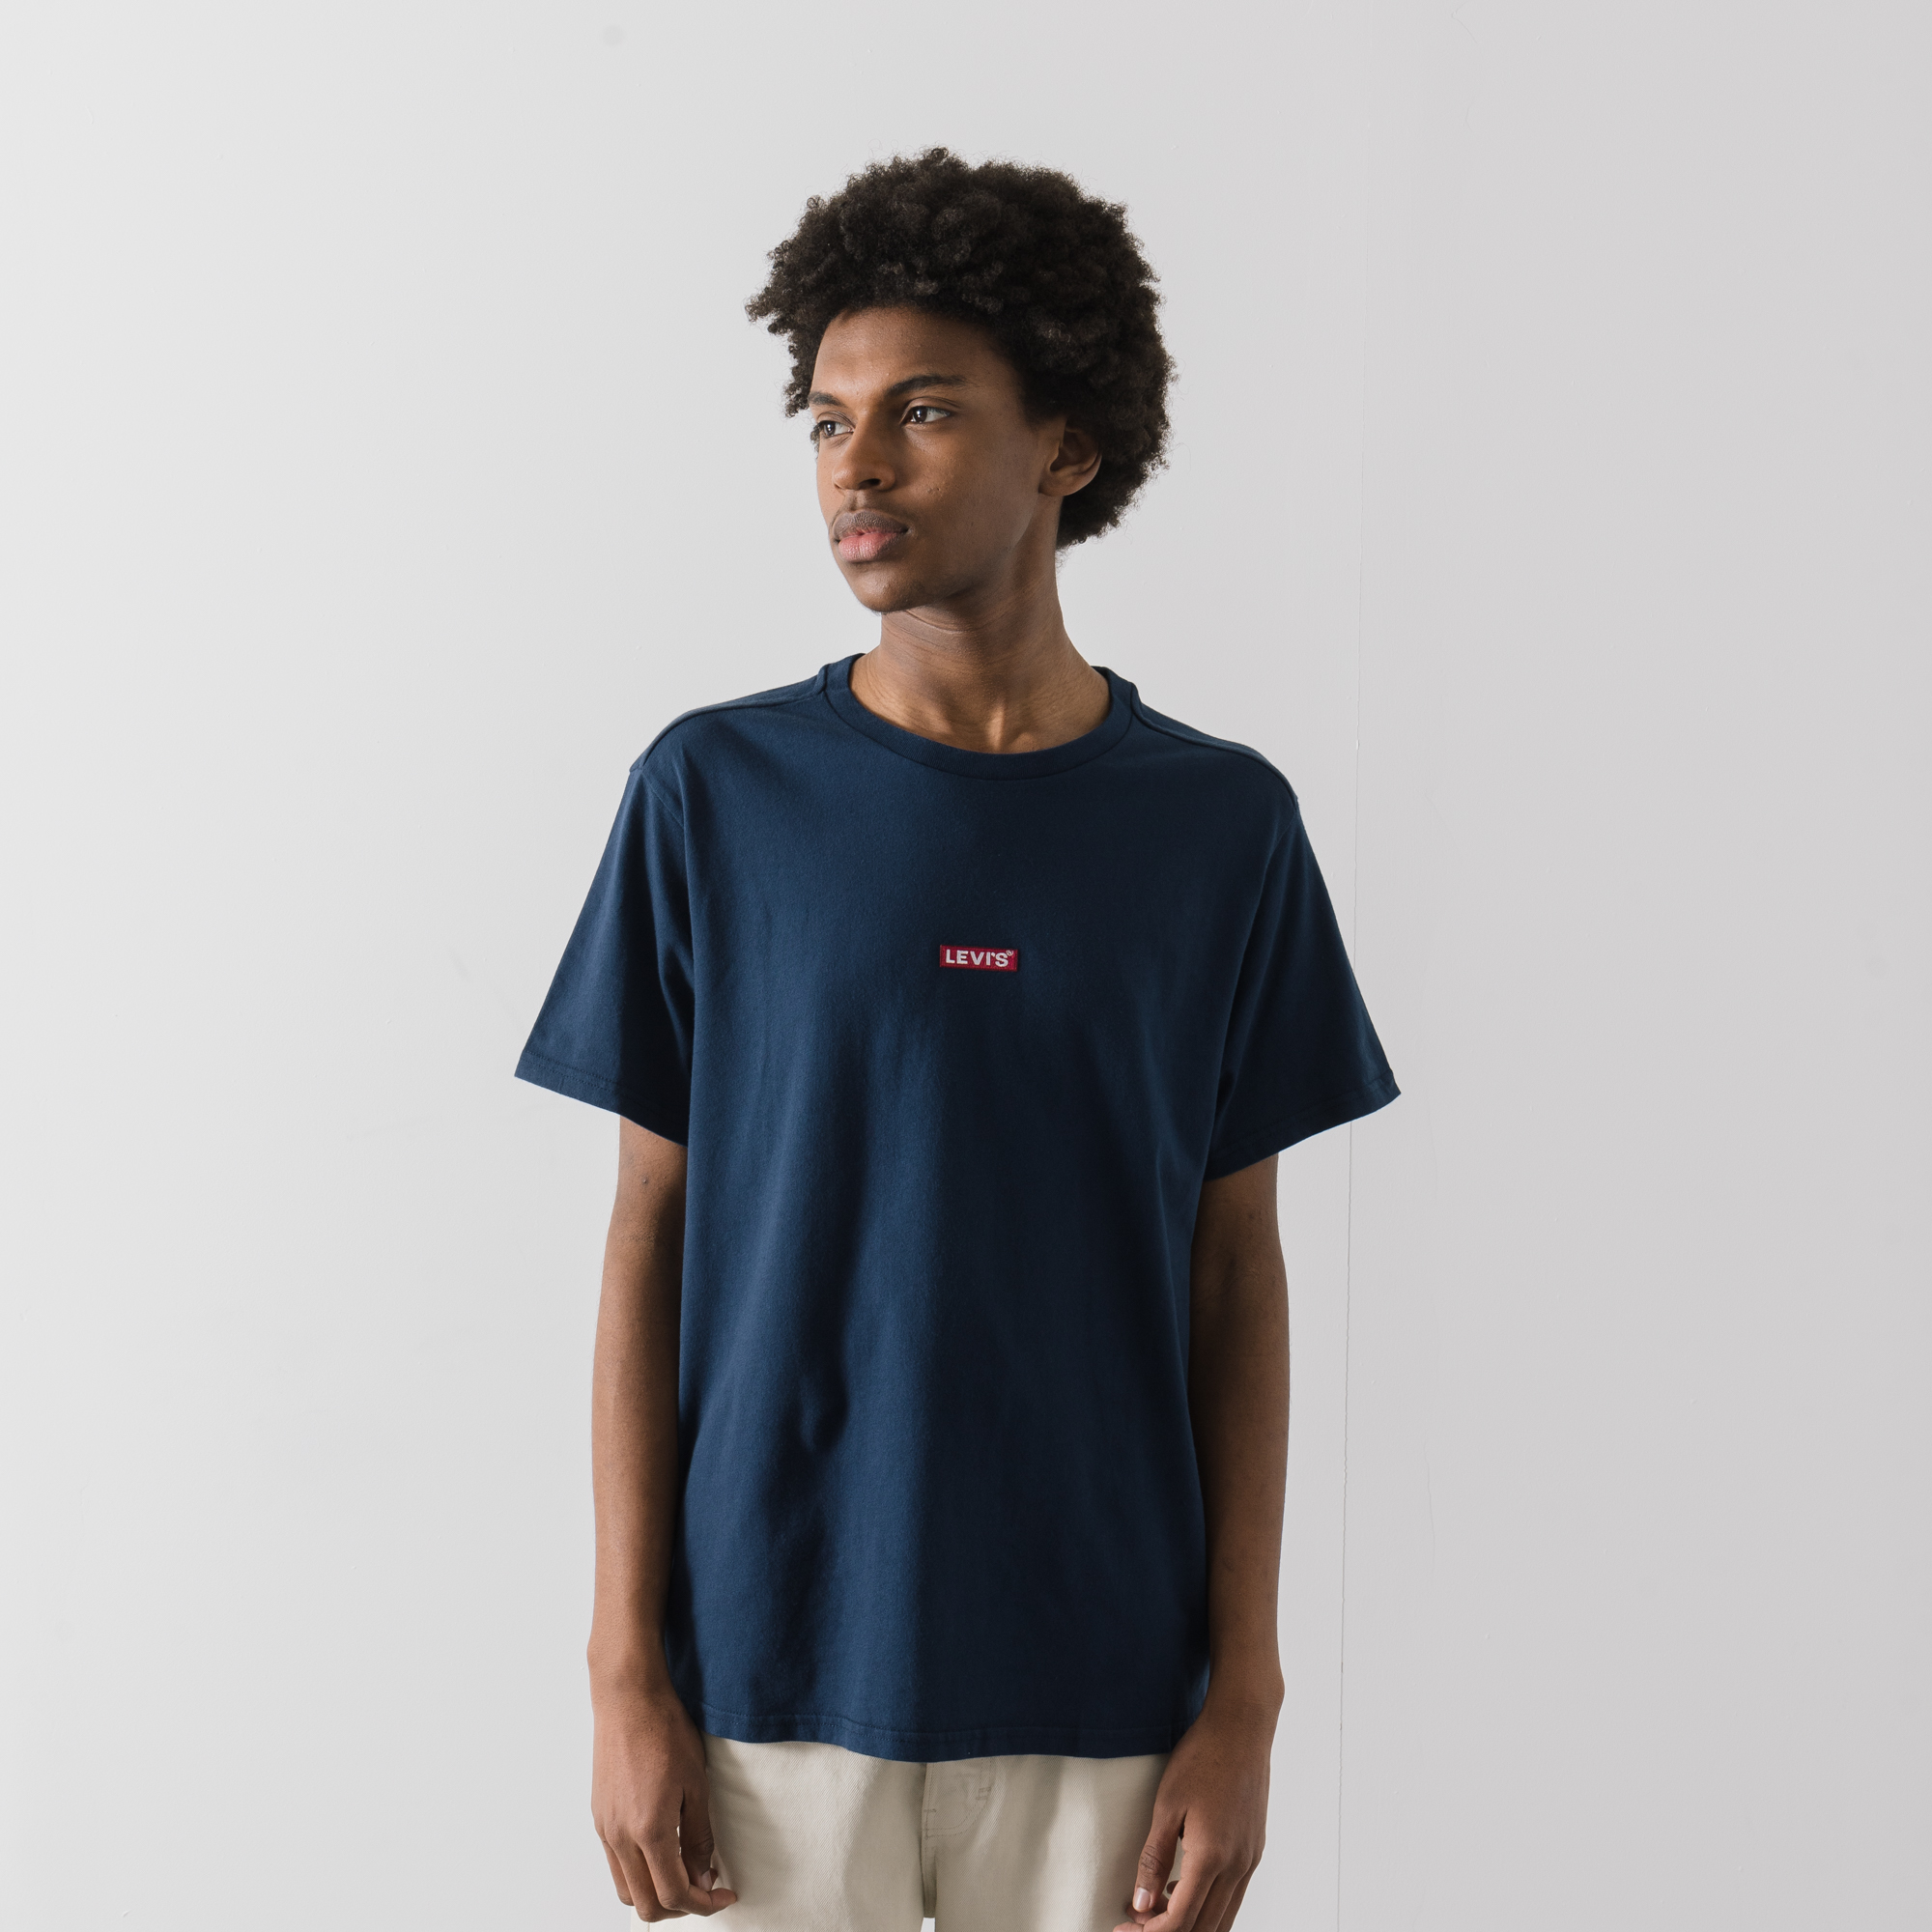 LEVIS TEE SHIRT RELAXED BABY TAB BLUE - T-SHIRTS MEN 